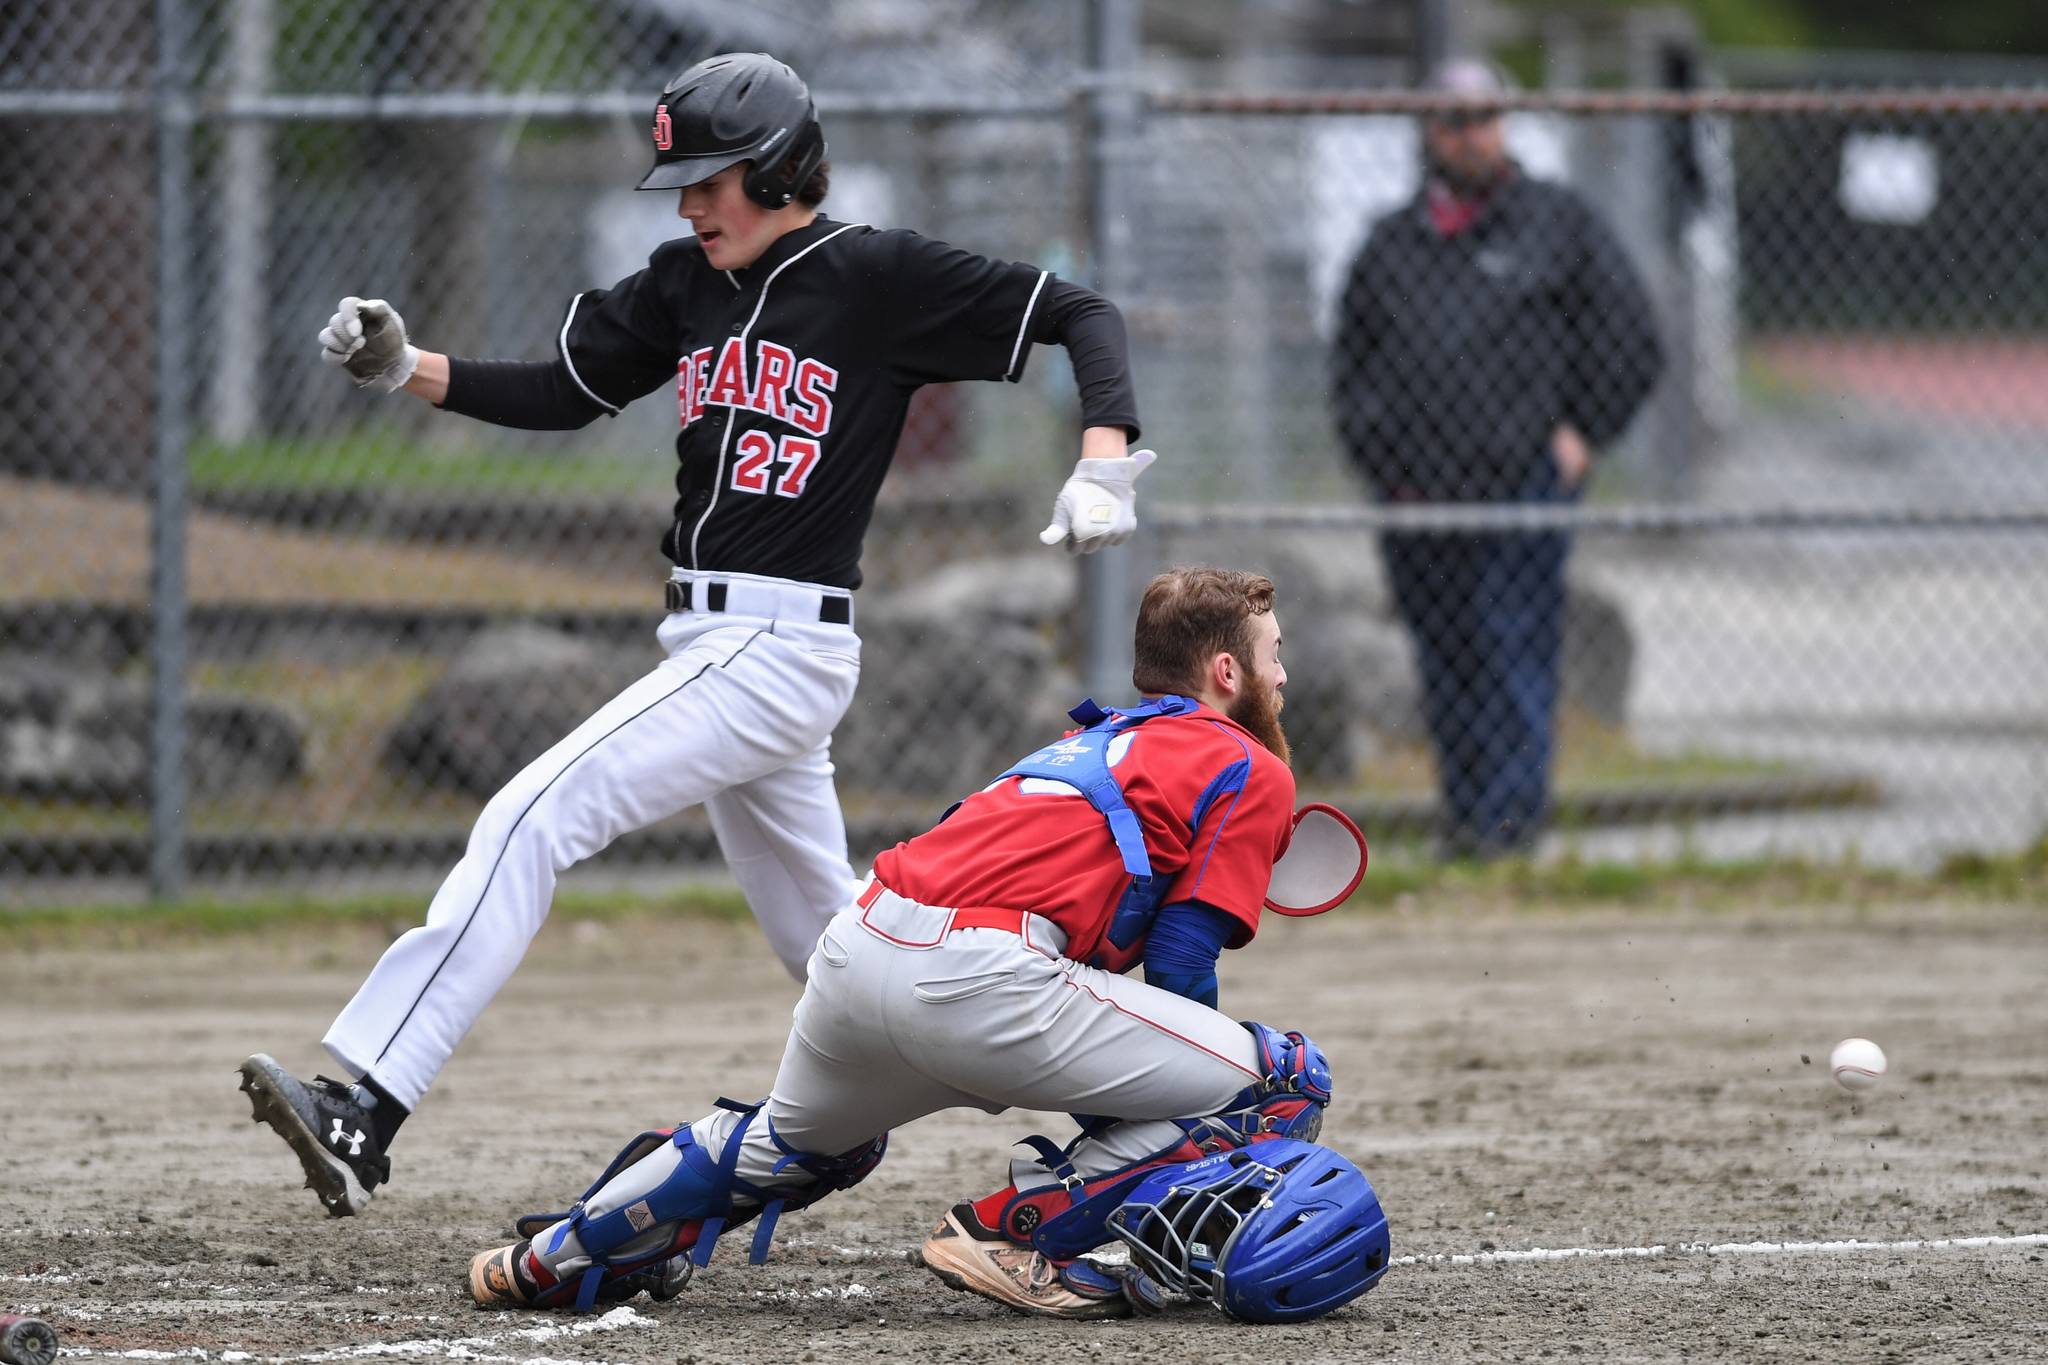 Juneau-Douglas’ Garrett Bryant scores in front of the throw to Sitka’s catcher Morgan Simic in the fourth inning during the Region V Baseball Championship at Adair-Kennedy Memorial Park on Thursday, May 23, 2019. Bryant and the Crimson Bears will play games in Sitka Friday and Saturday. (Michael Penn / Juneau Empire File)